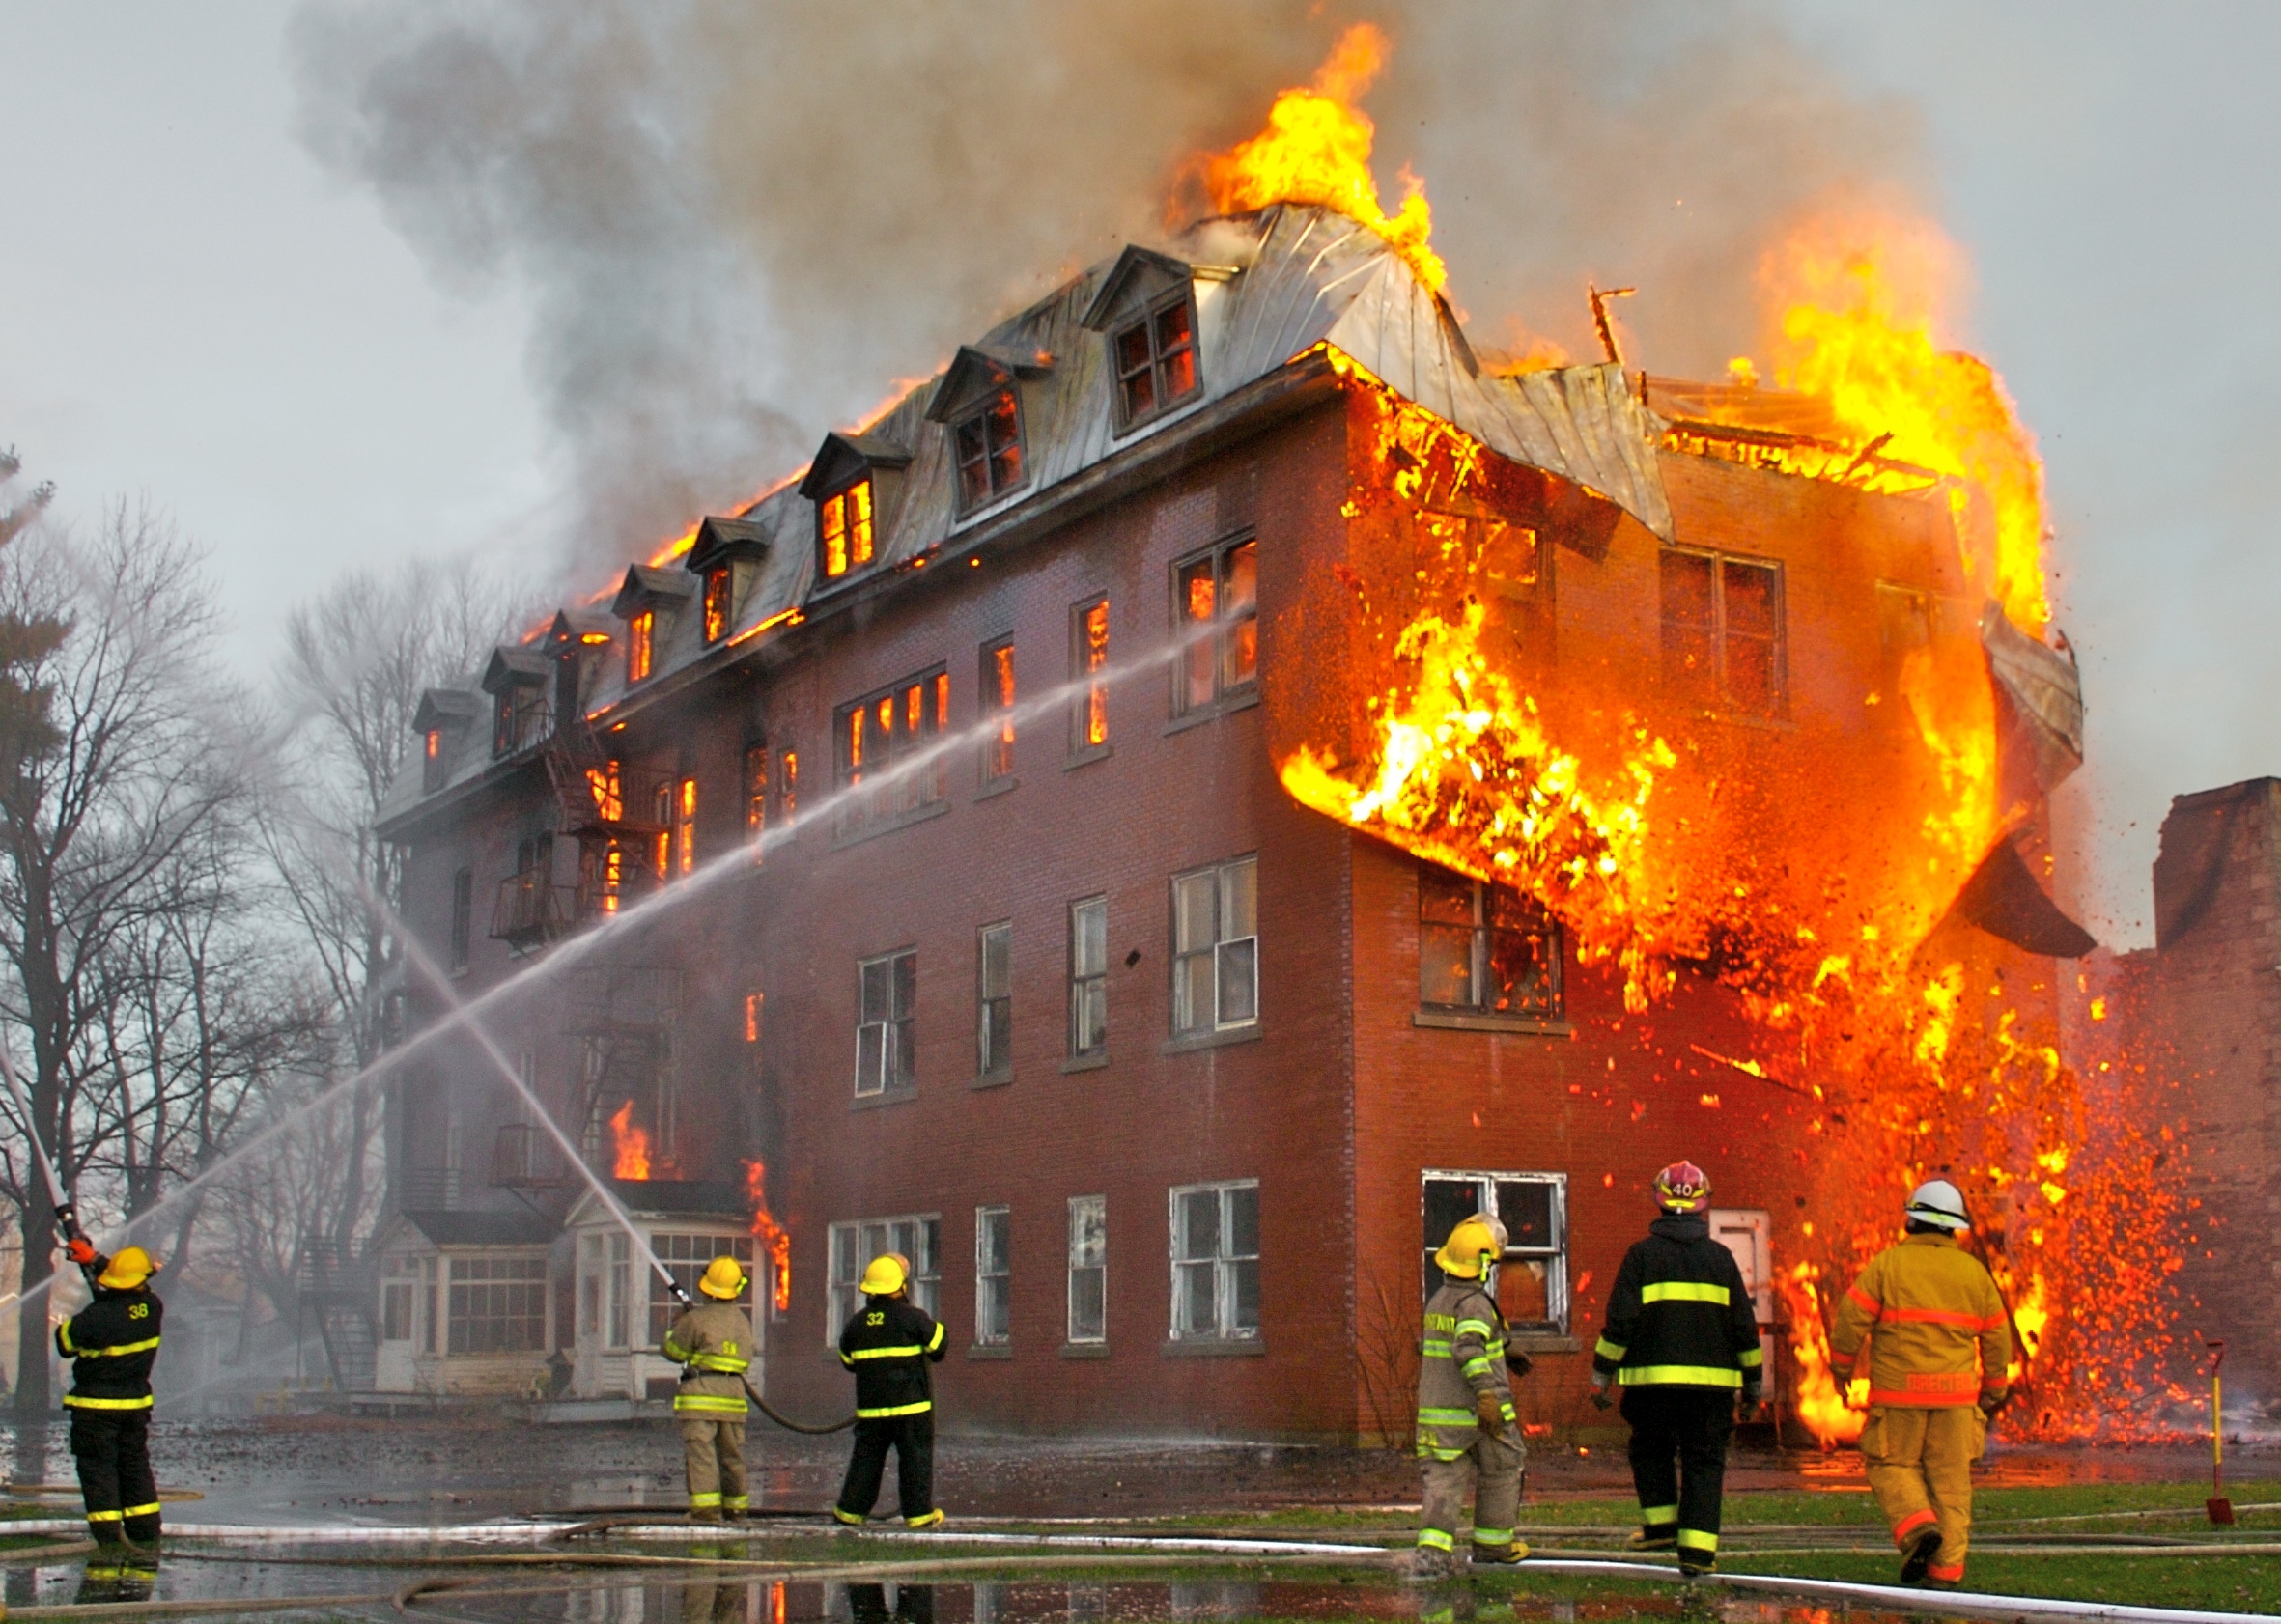 Poor sprinkler coverage caused five senior citizens to die in a nursing home fire